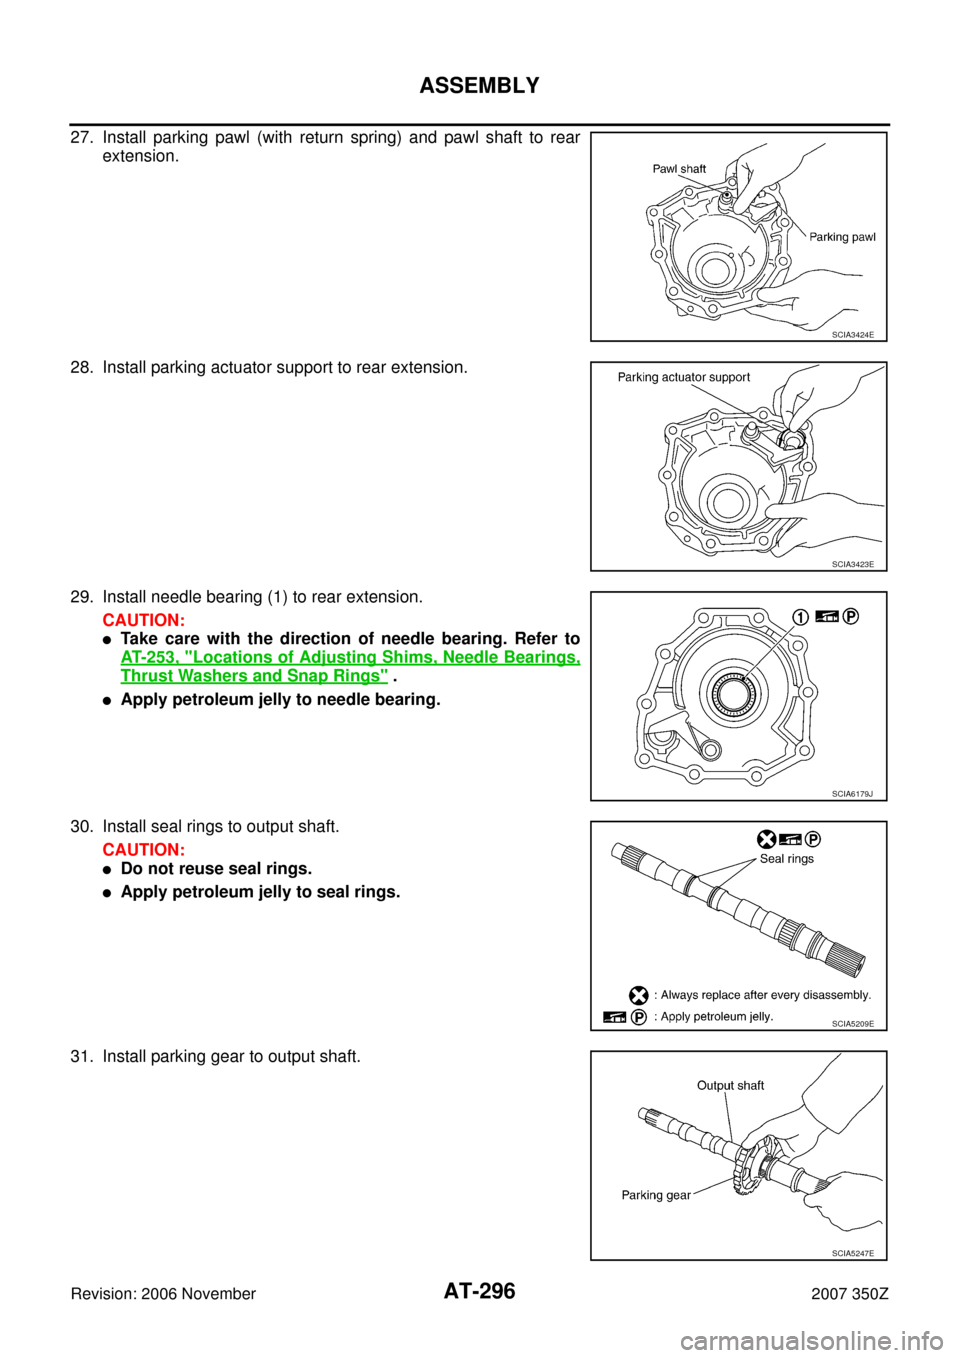 NISSAN 350Z 2007 Z33 Automatic Transmission Workshop Manual AT-296
ASSEMBLY
Revision: 2006 November2007 350Z
27. Install parking pawl (with return spring) and pawl shaft to rear
extension.
28. Install parking actuator support to rear extension.
29. Install nee